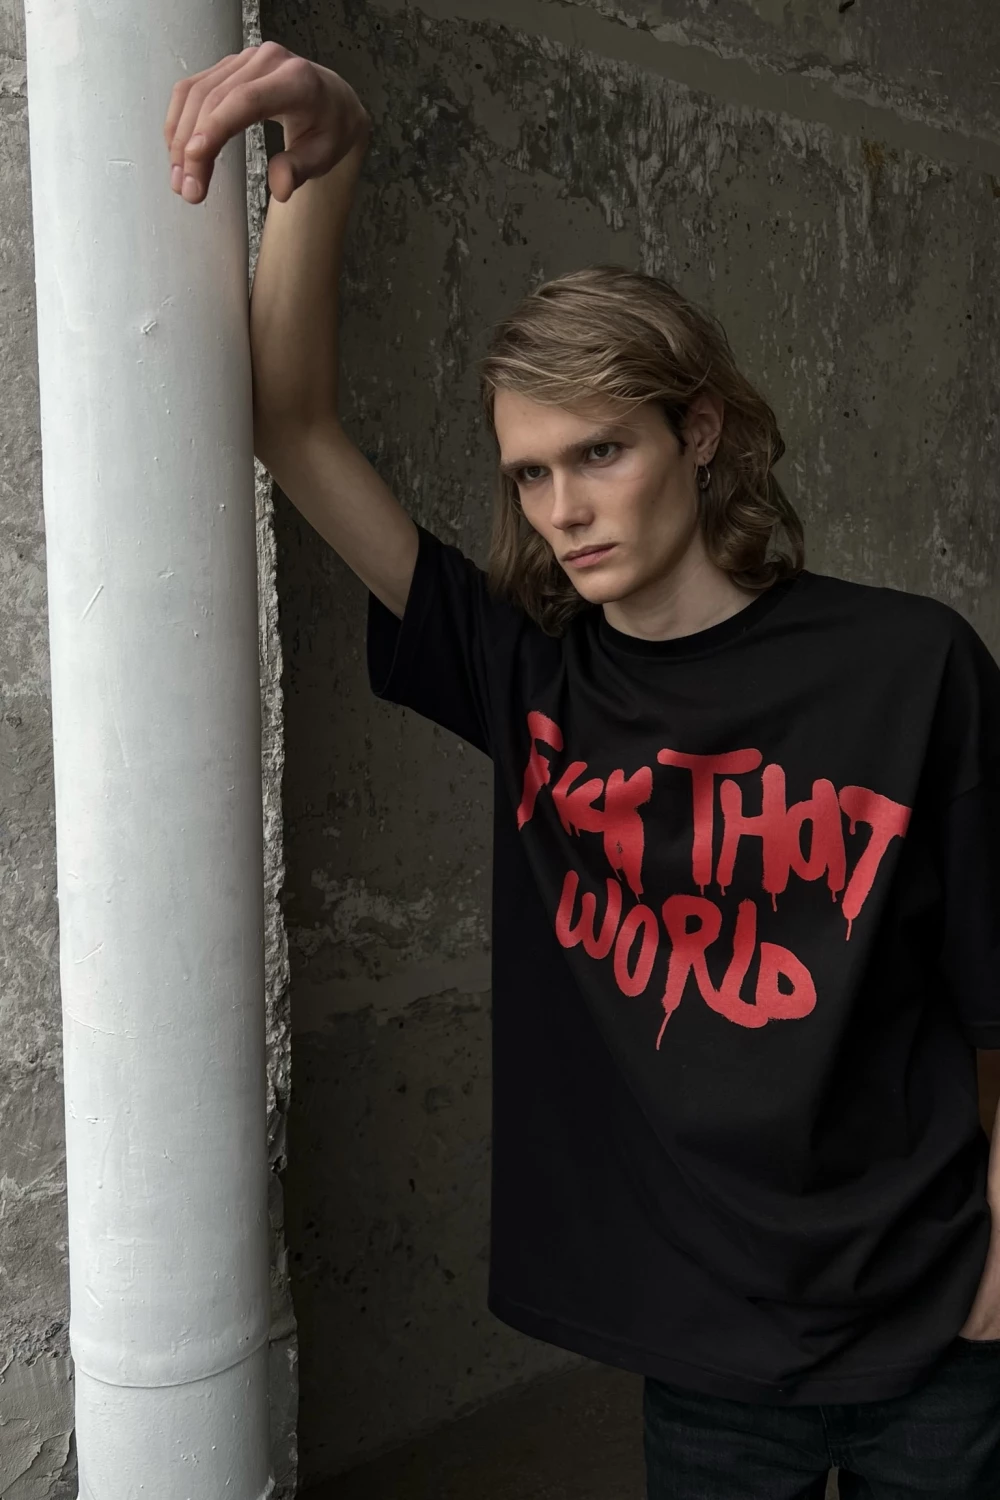 t-shirt "fuck that world" in black color